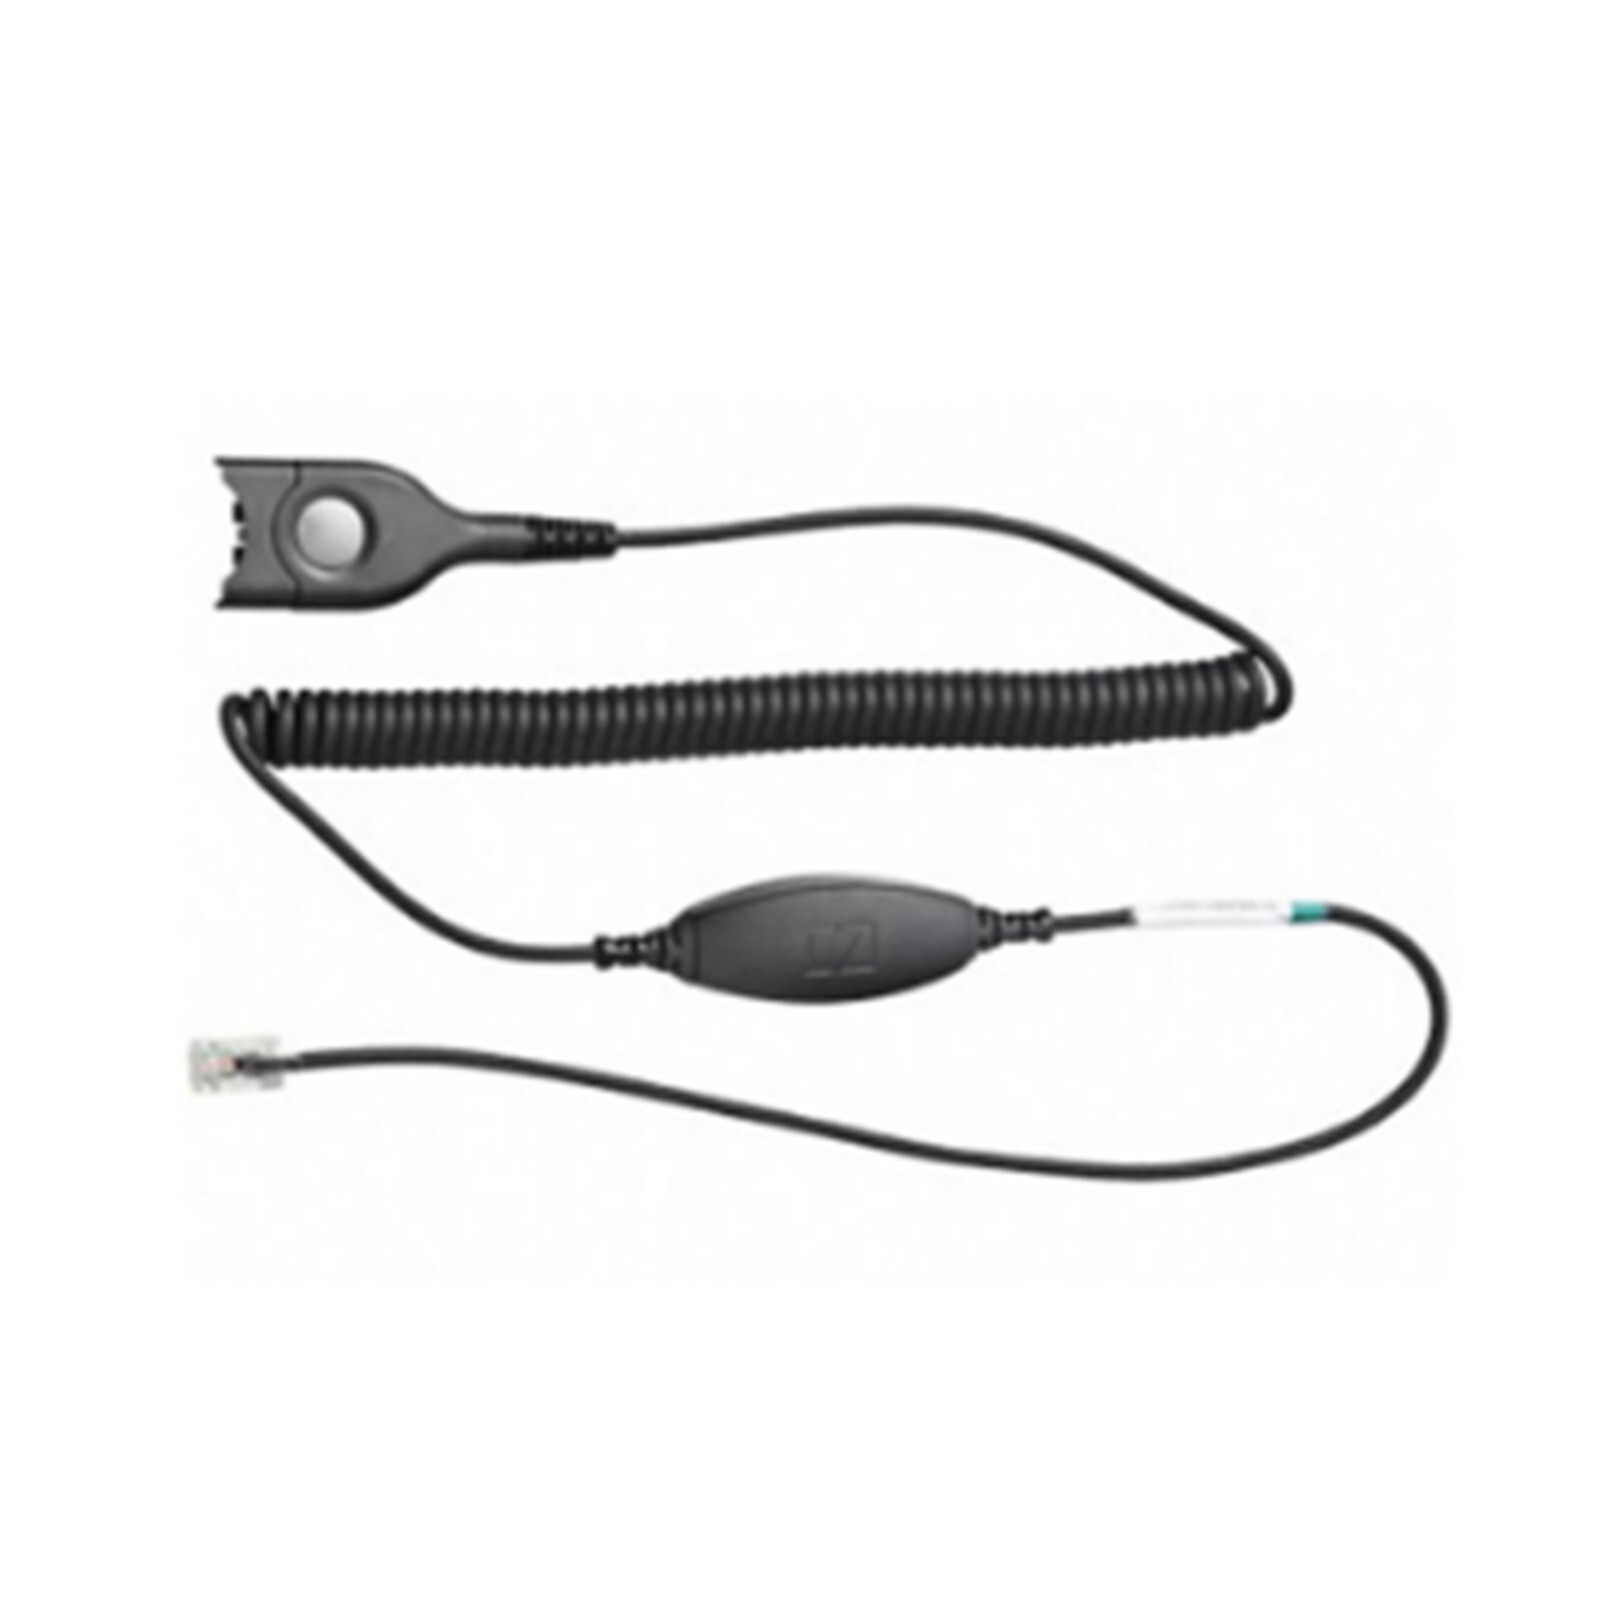 Sennheiser Bottom cable: Easy Disconnect to modular plug - coiled cable to be used with Avaya 1600/9600 series telephones